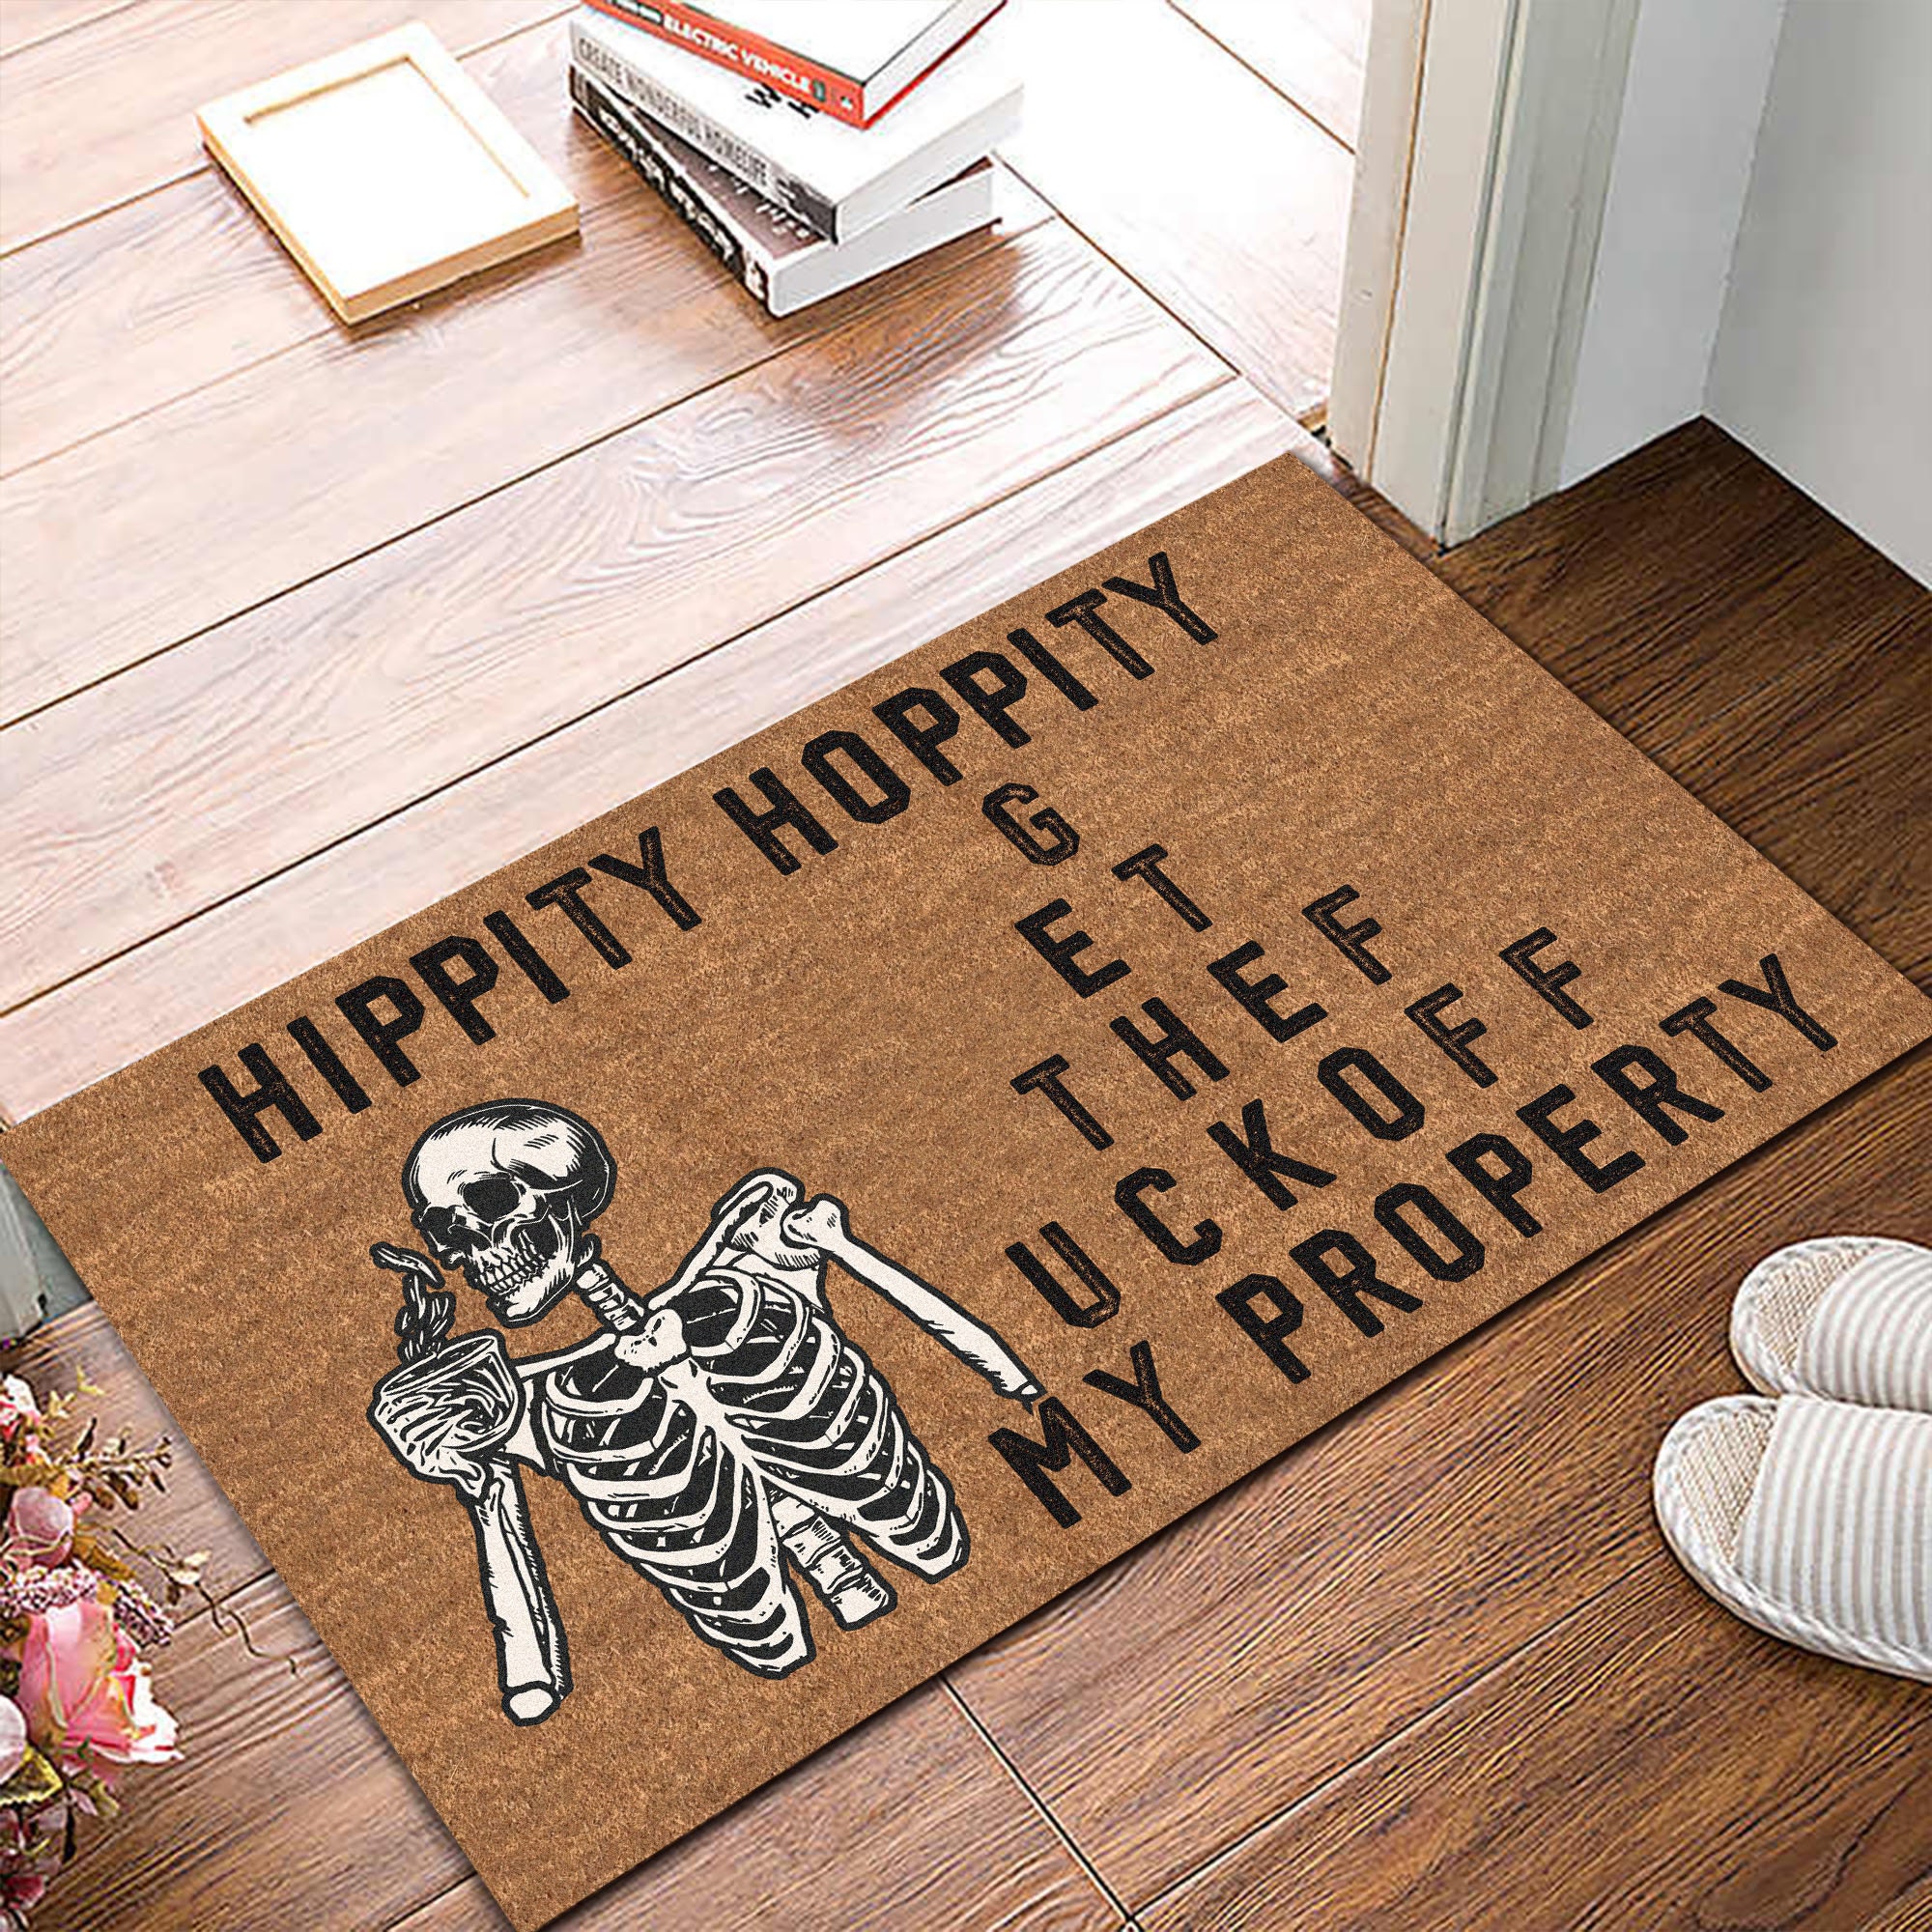 Hippity Hoppity Get Off My Property Inside Funny Door Mats for Outside Entry